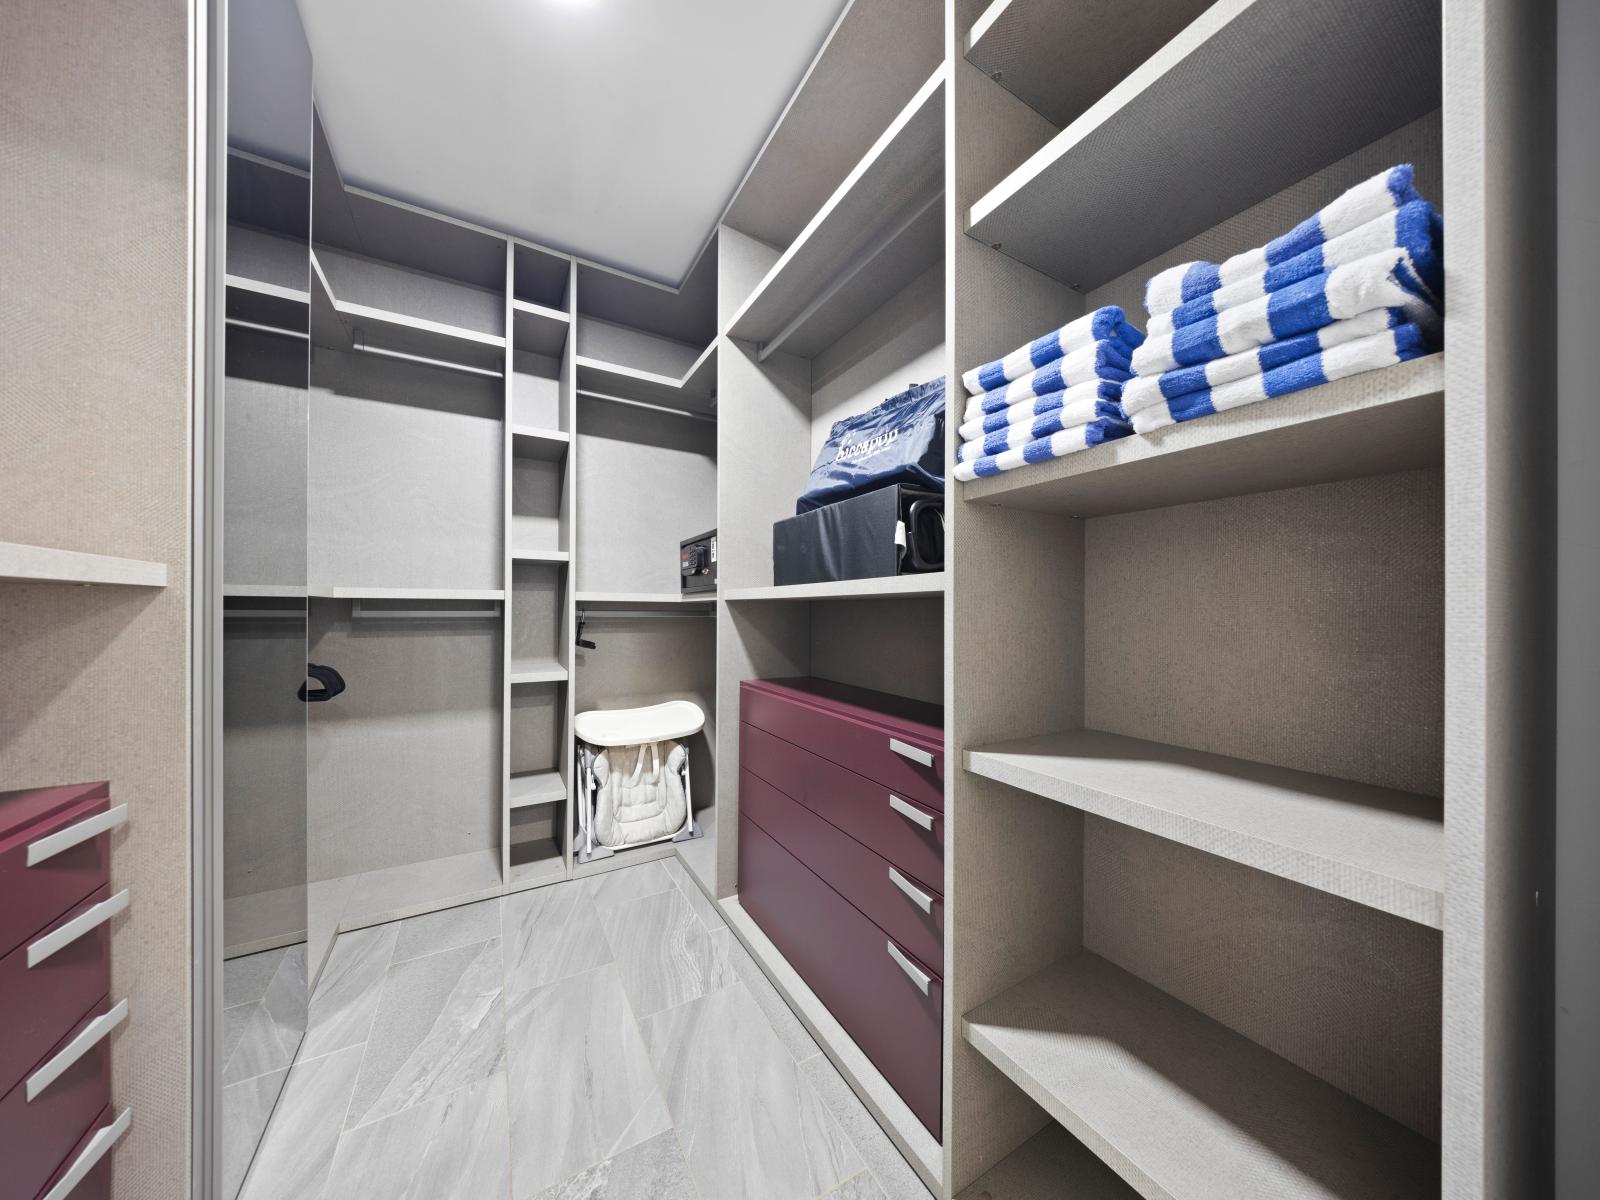 Experience convenience and organization in the walk-in closet of the home in Aruba - A spacious haven for your wardrobe and accessories, store and maintain as you want - Indulge in the ample storage space, ensuring a clutter-free stay